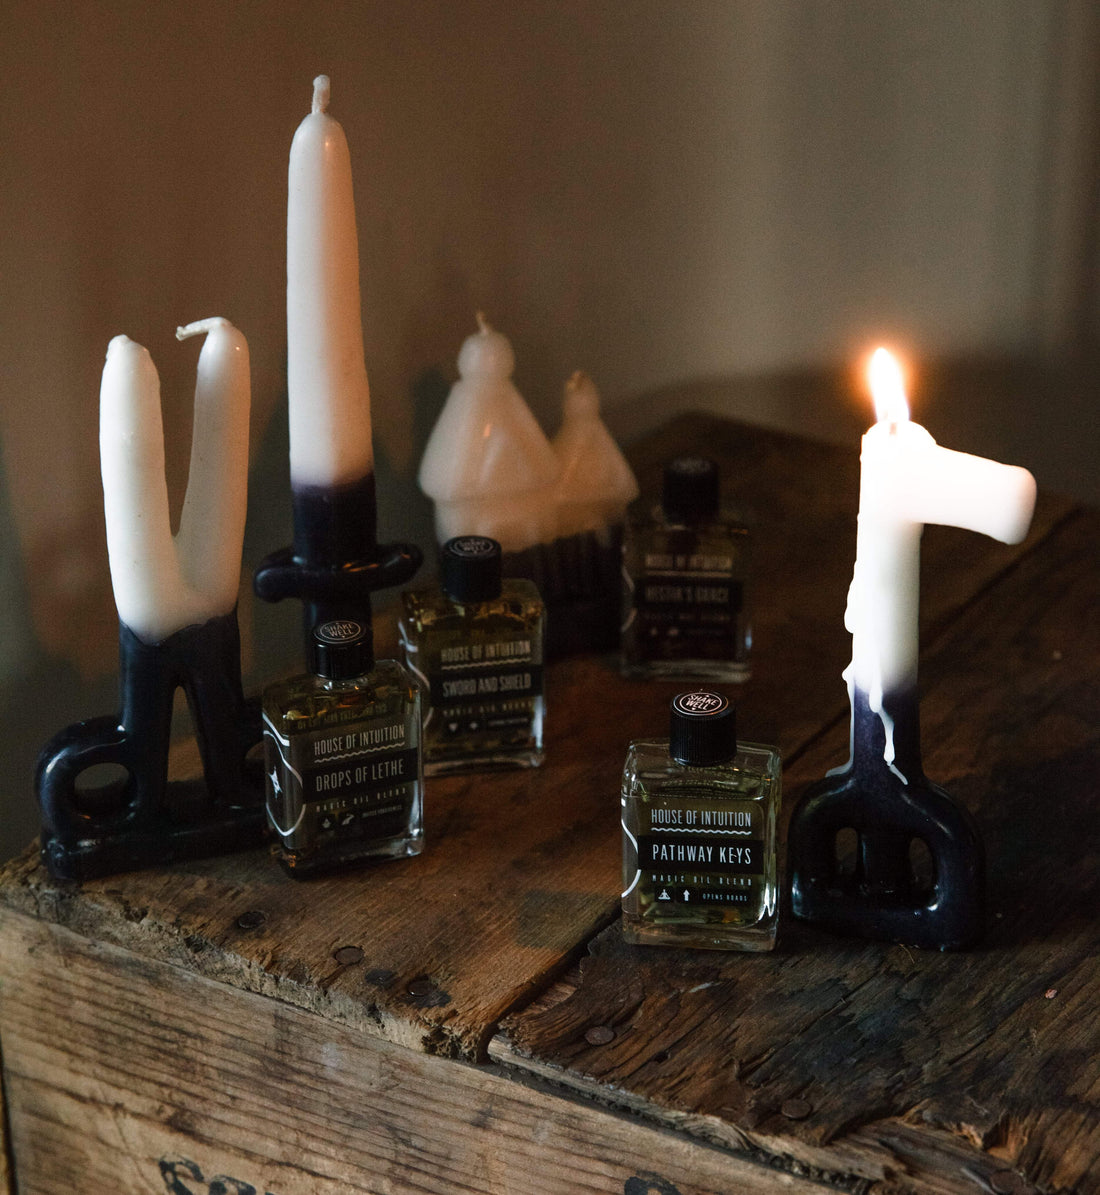 "Be My Shield" Symbol Shape Candle Kit (with Sword & Shield Anointing Oil) Symbol Shape Candle House of Intuition 